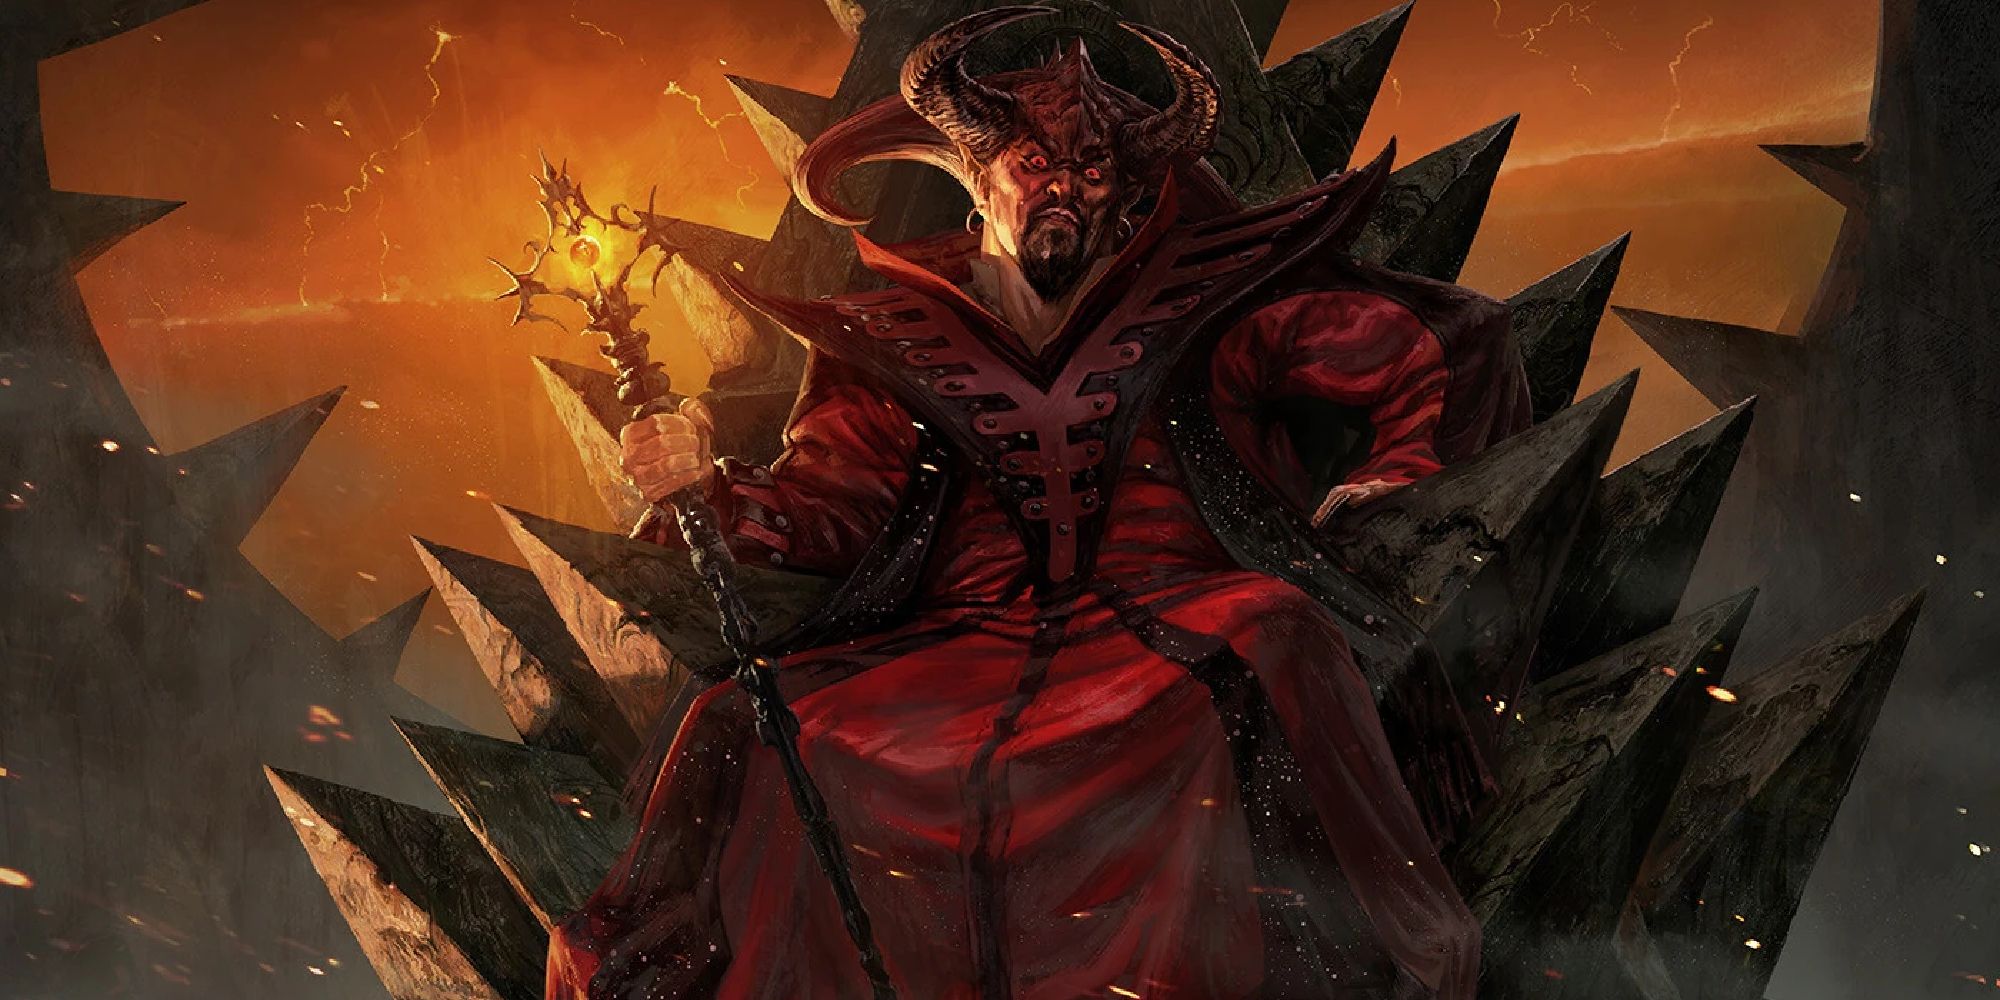 Asmodeus sitting on a throne of sharp stones, clutching a fiery scepter in one hand. 